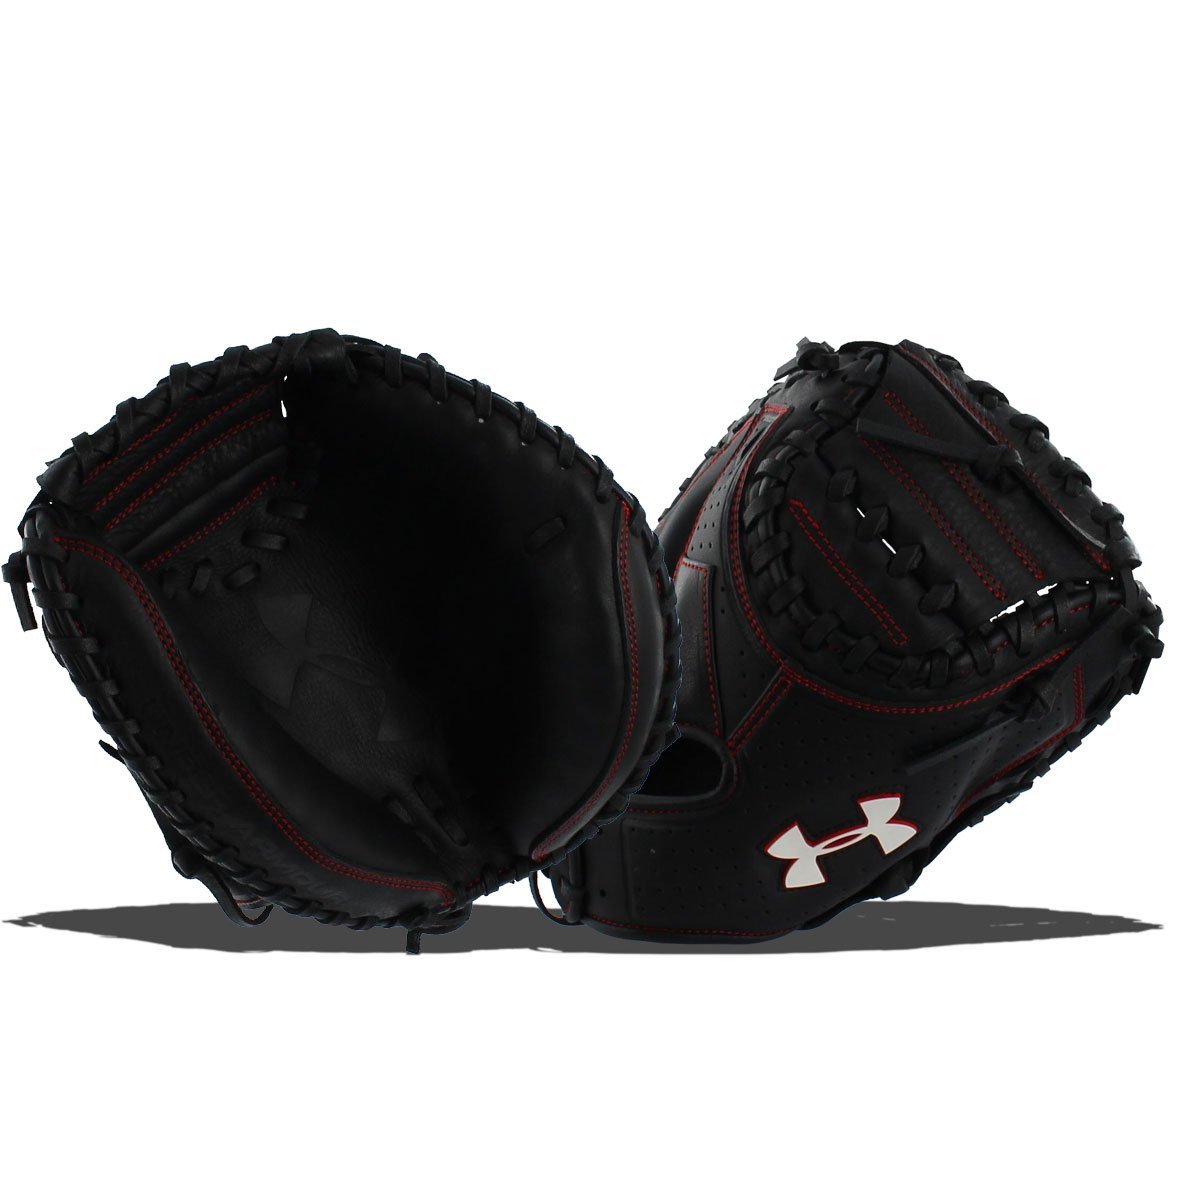 under-armour-youth-framer-31-inch-left-hand-throw-catchers-mitt UACM-100Y-LeftHandThrow Under 029343039171 features a high end design with long lasting durability. Constructed of